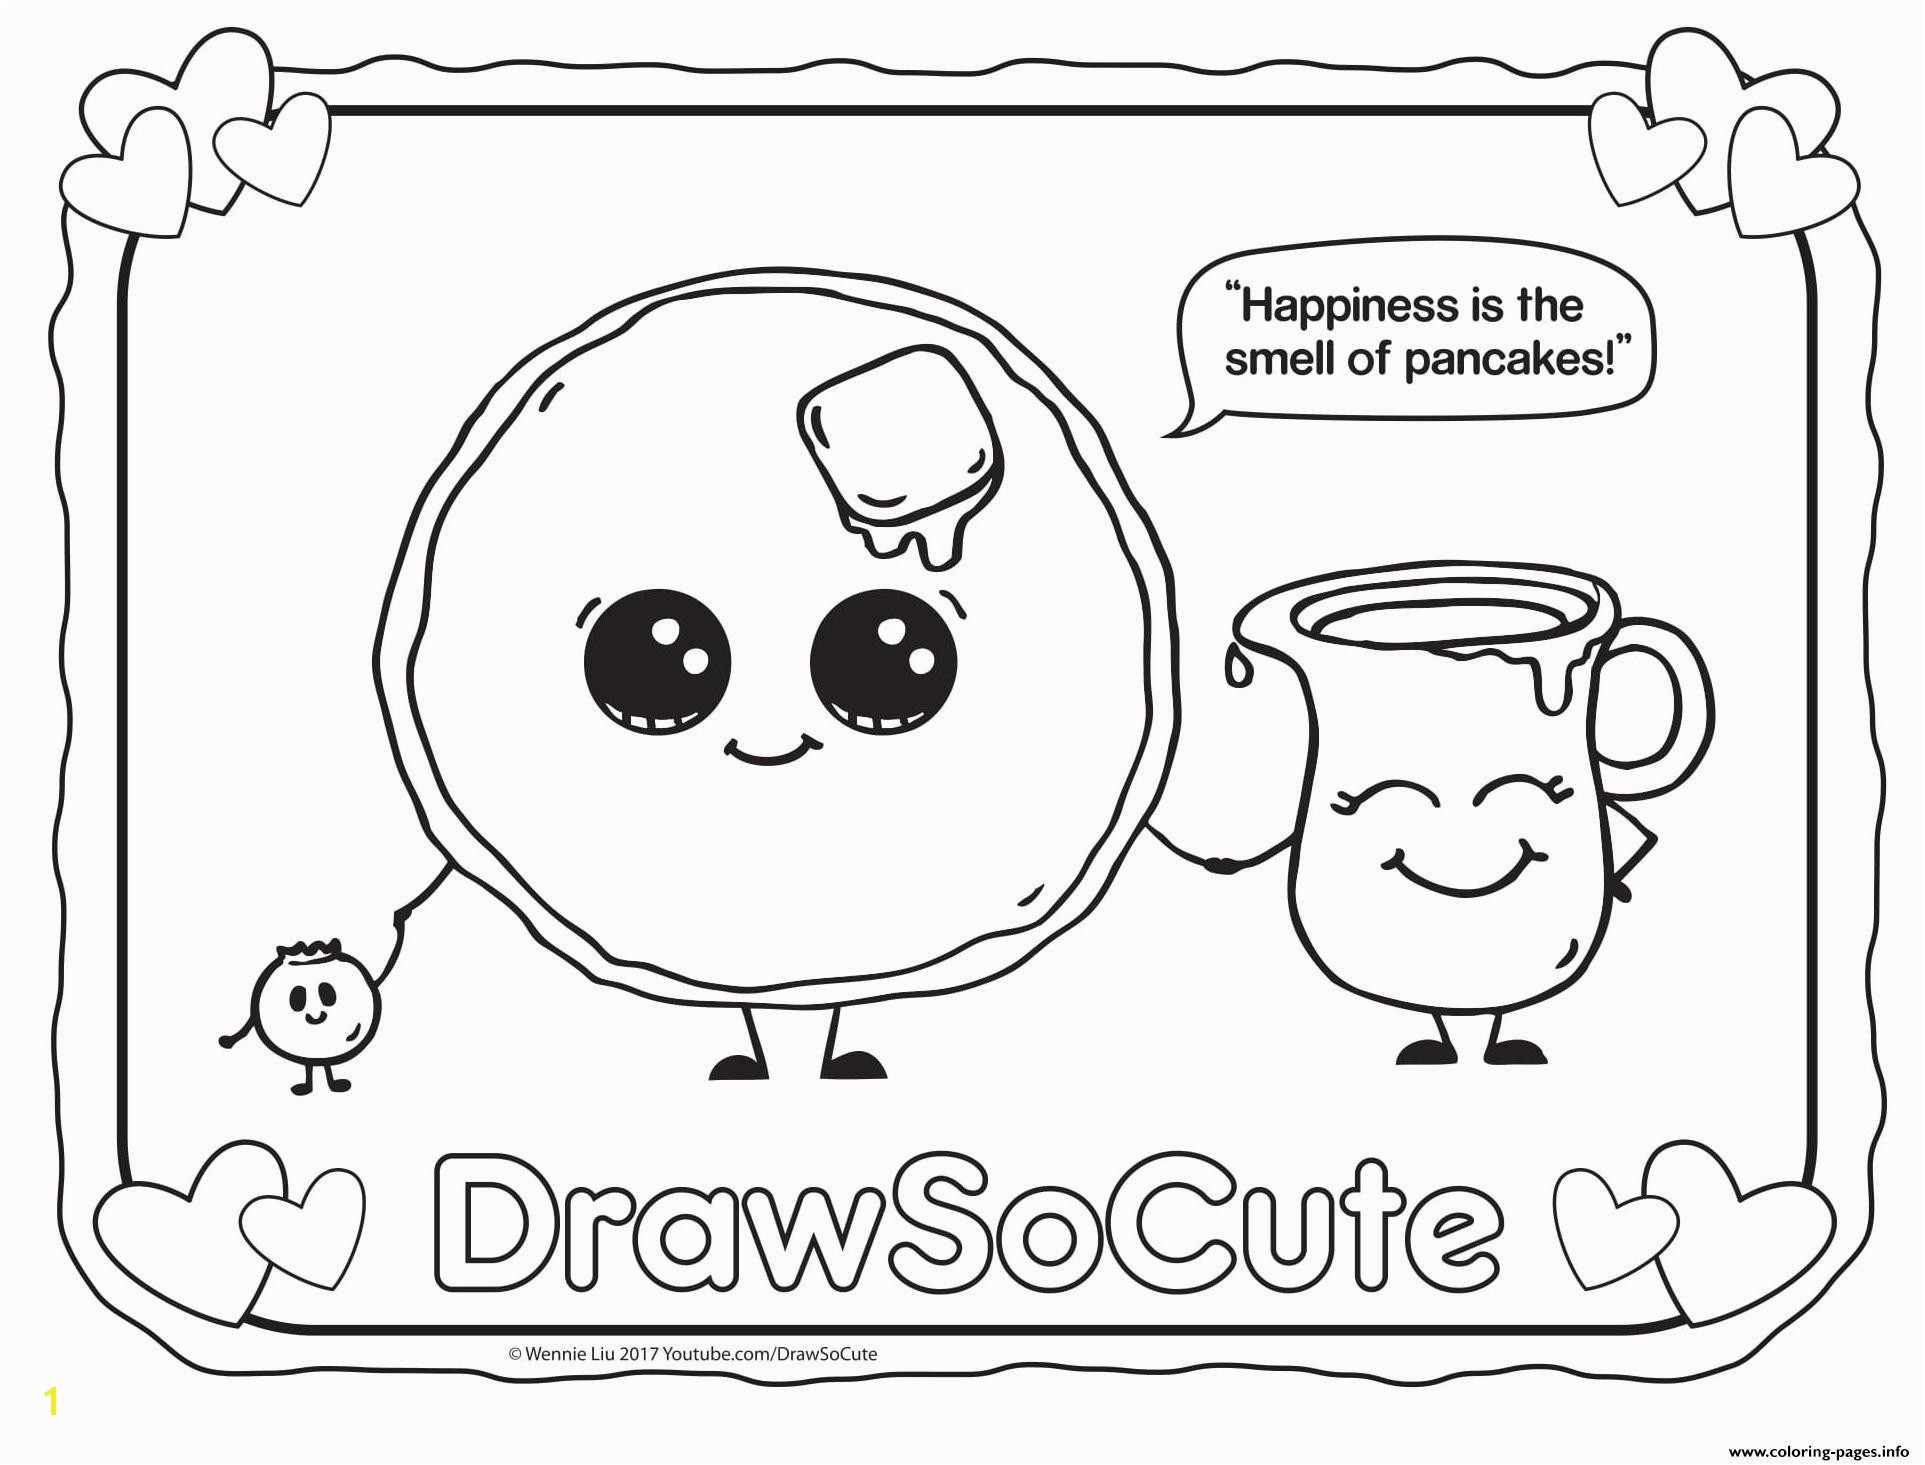 Www Coloring Pages New Coloring Pages Drawings Fresh S Cute Drawing Coloring Pages Drawing